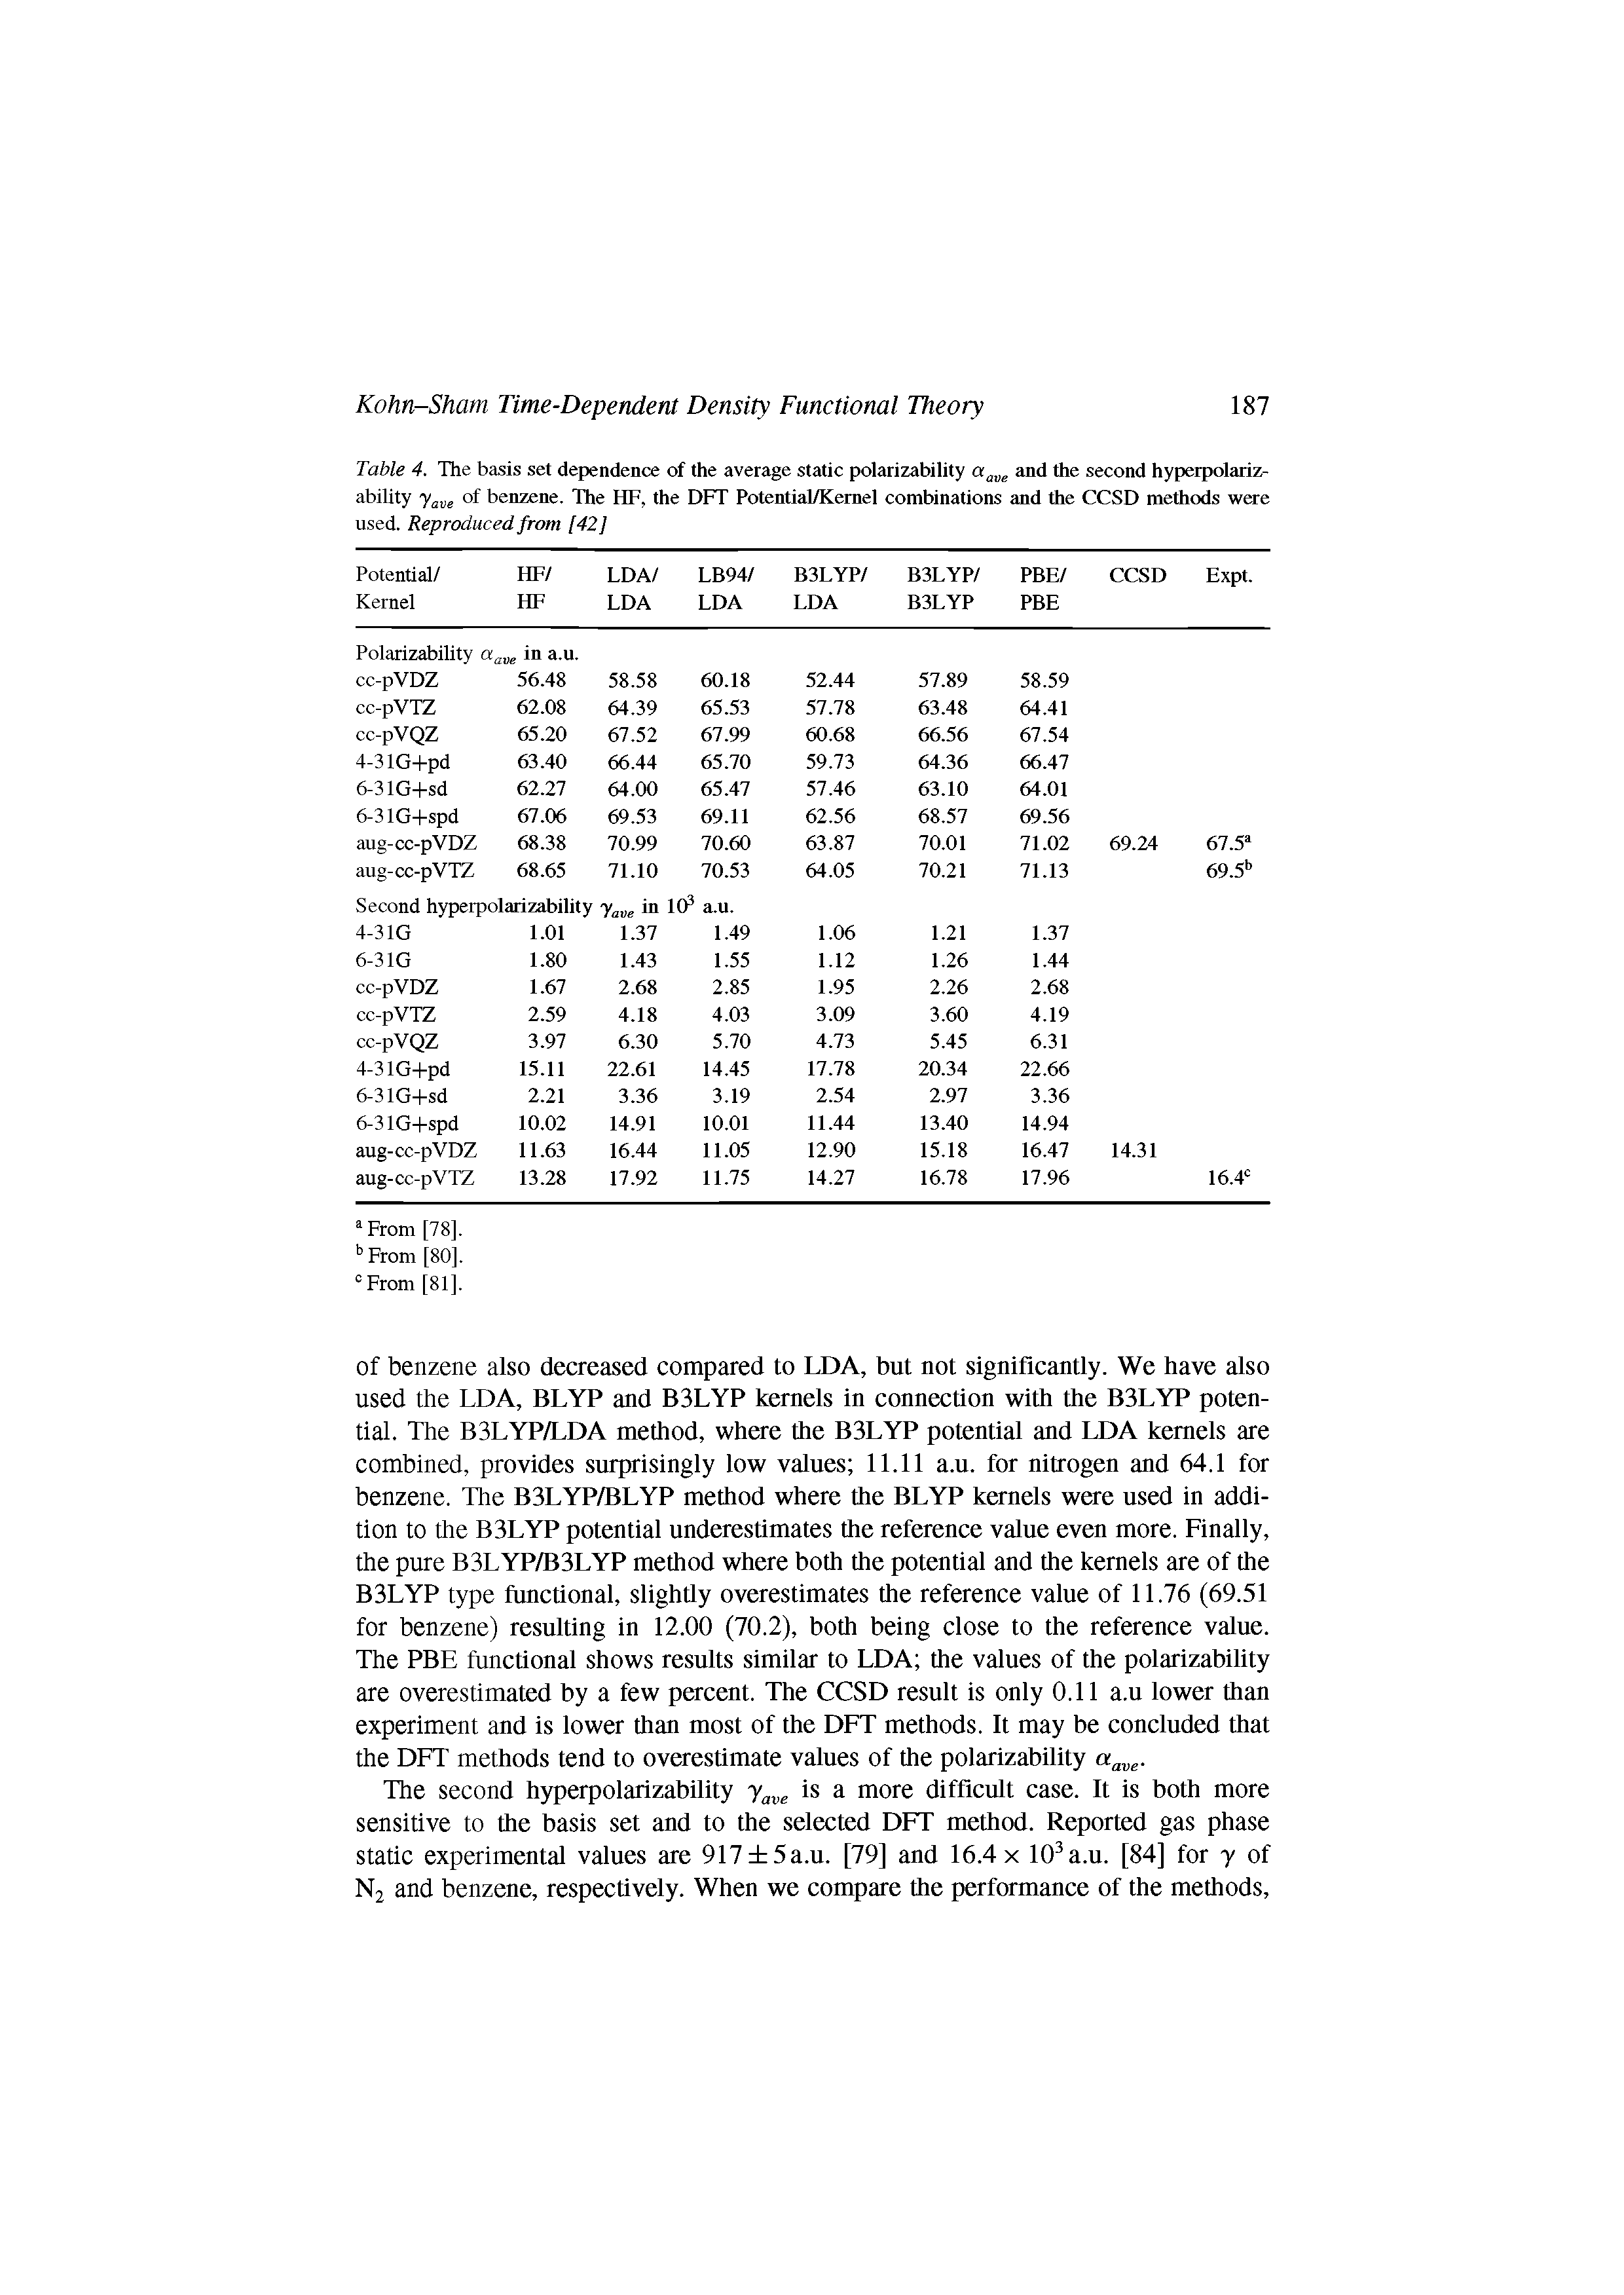 Table 4. The basis set dependence of the average static polarizability and the second hyperpolarizability of benzene. The lib, the DFT Potential/Kcrnel combinations and the CCSD methods were used. Reproduced from [42]...